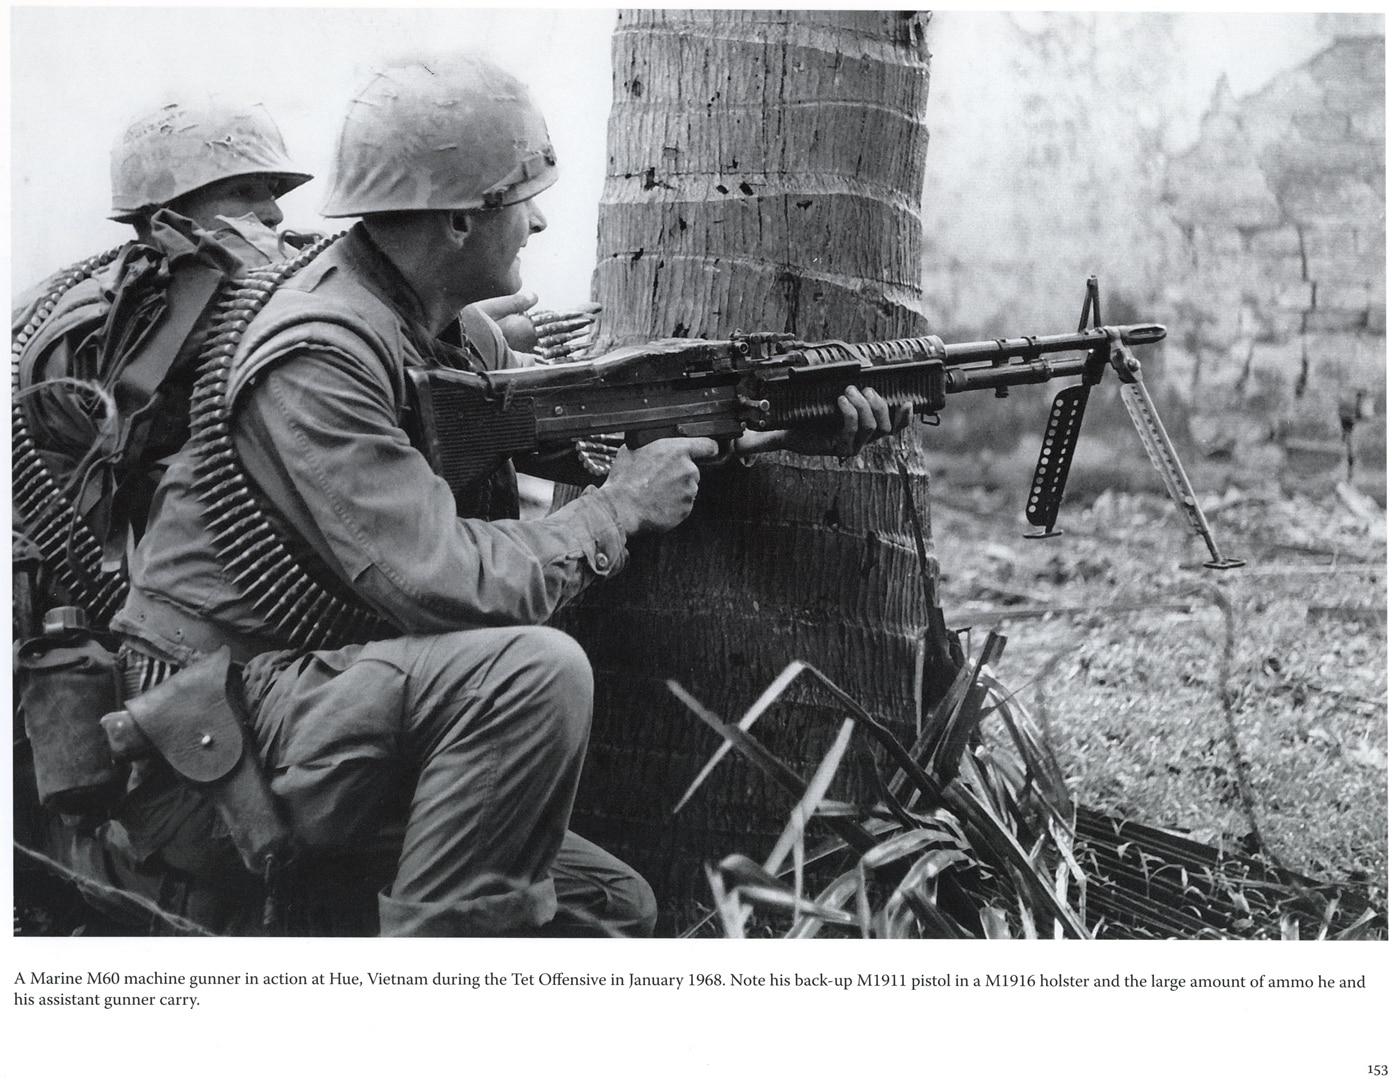 m60 gunner with 1911 pistol in the vietnam war shooting at vc